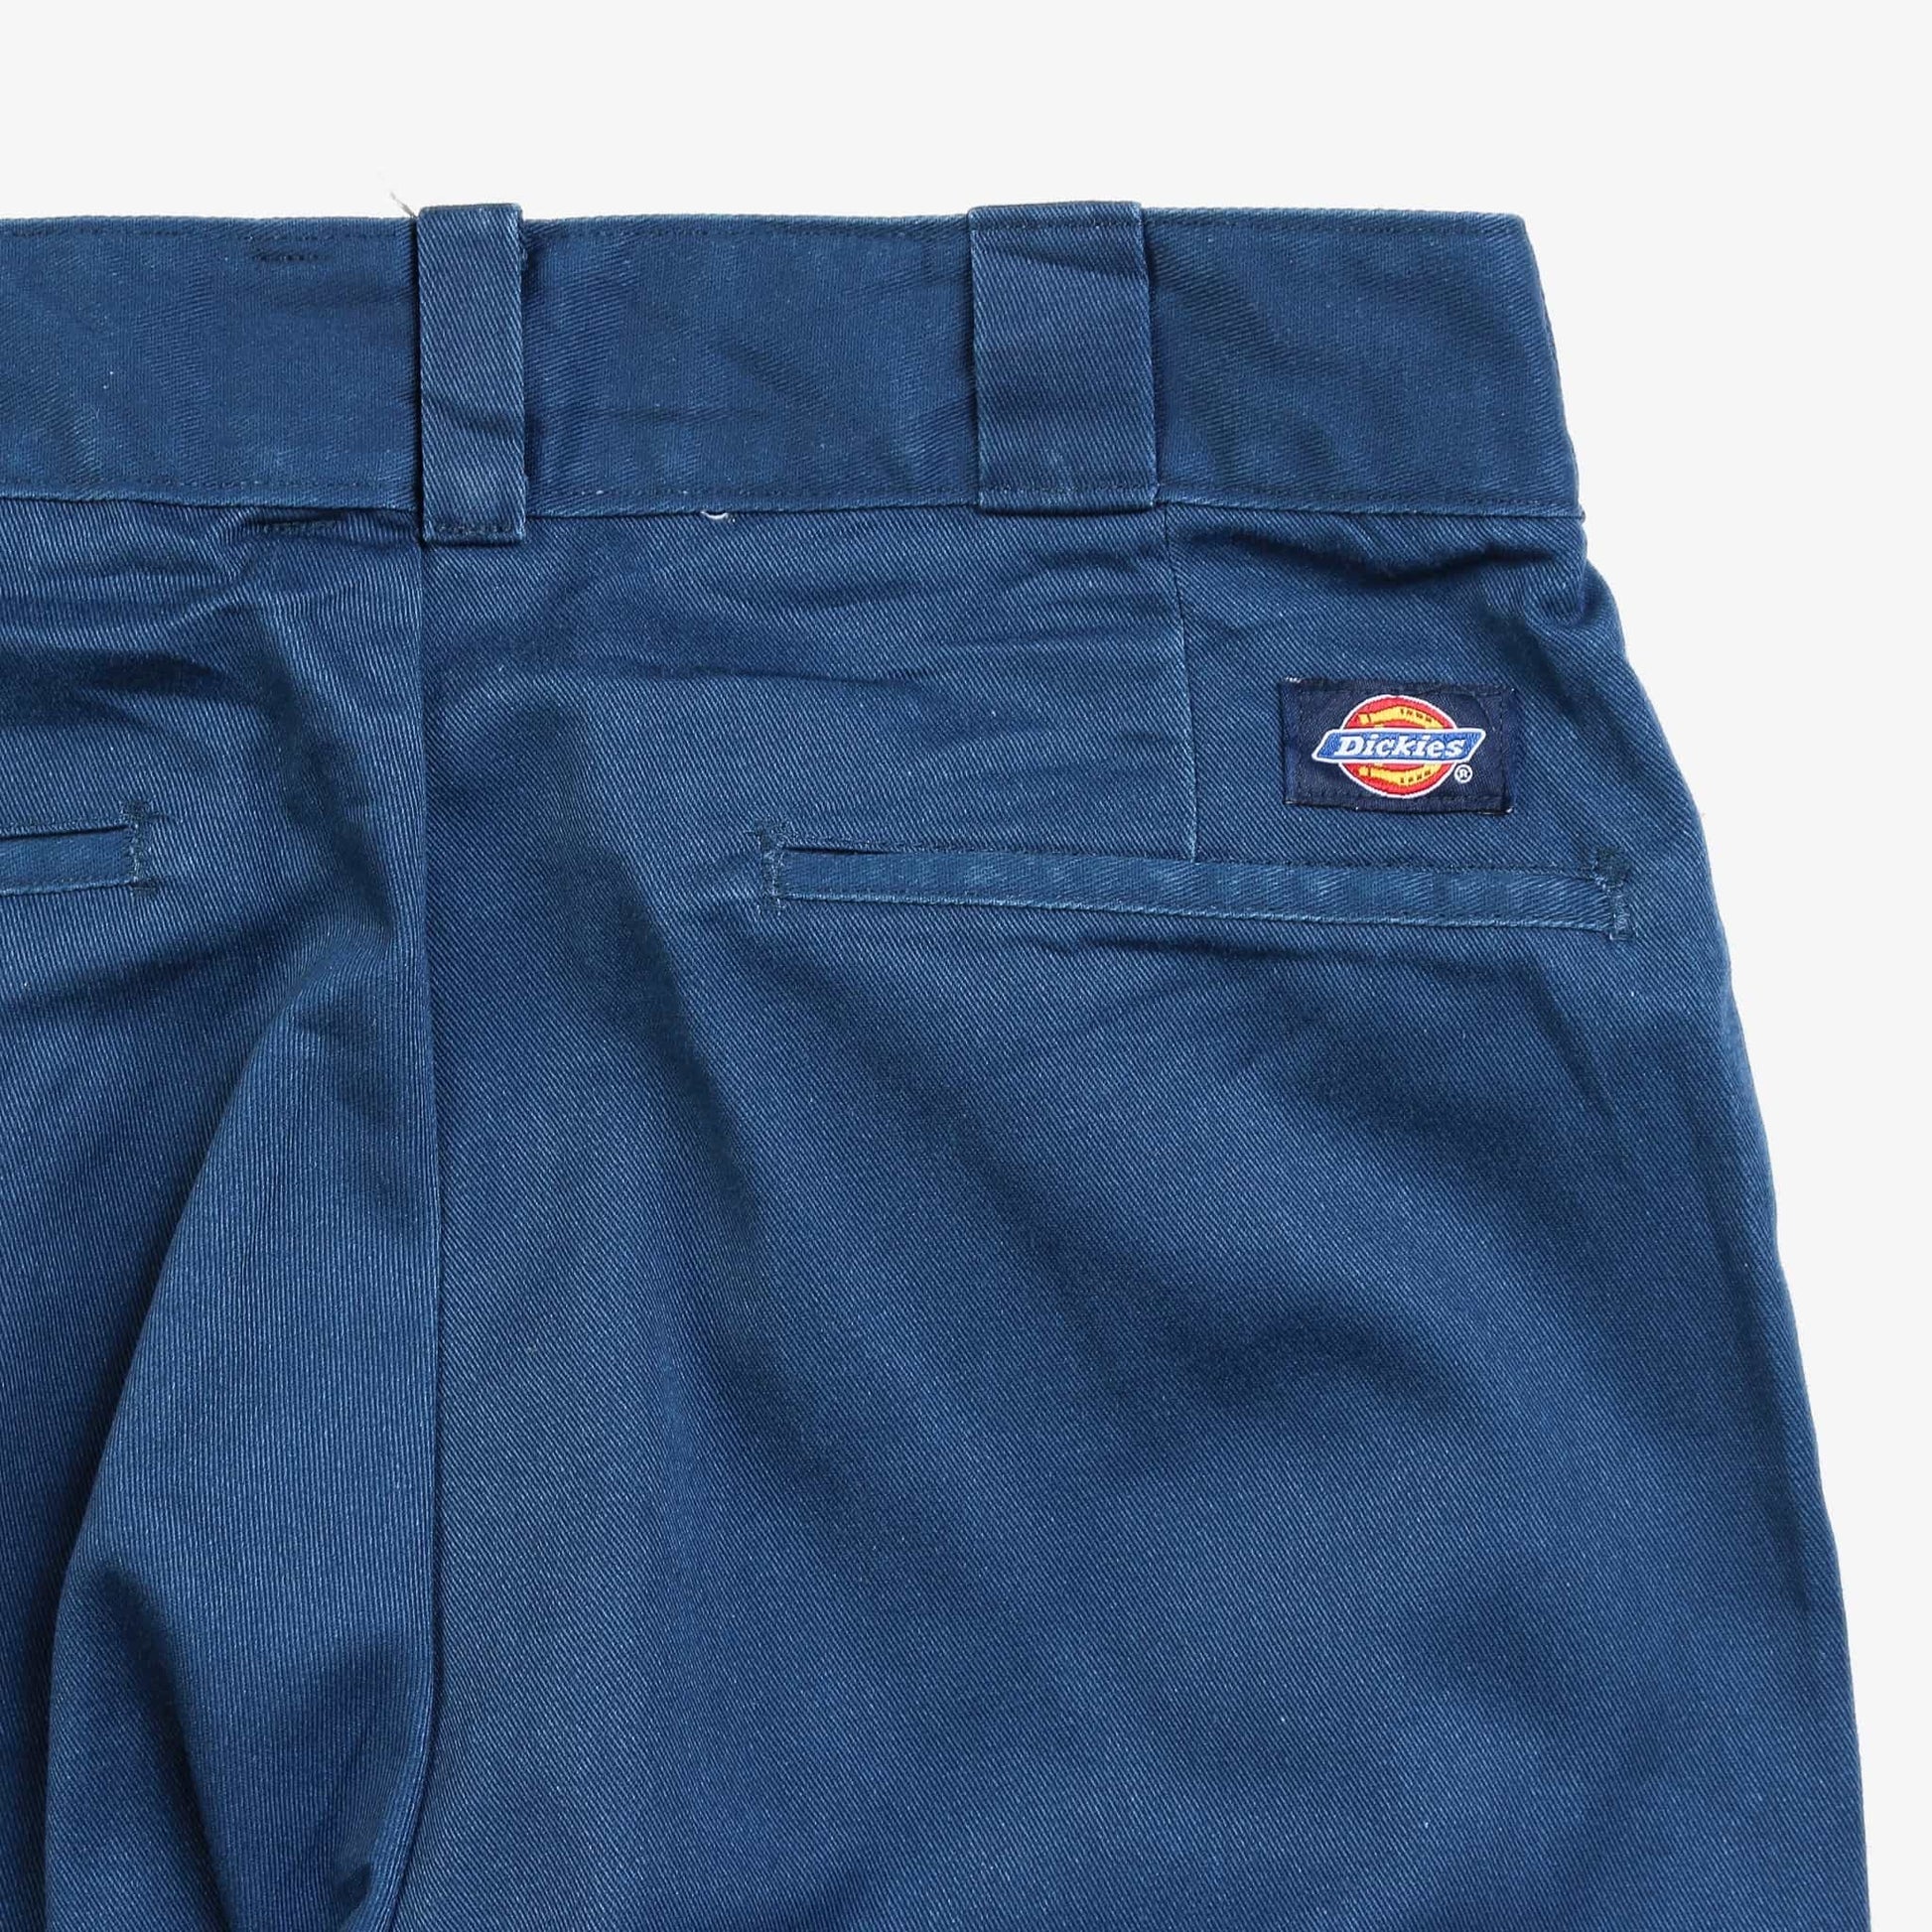 874 Work Trousers - Navy - 28/32 - American Madness